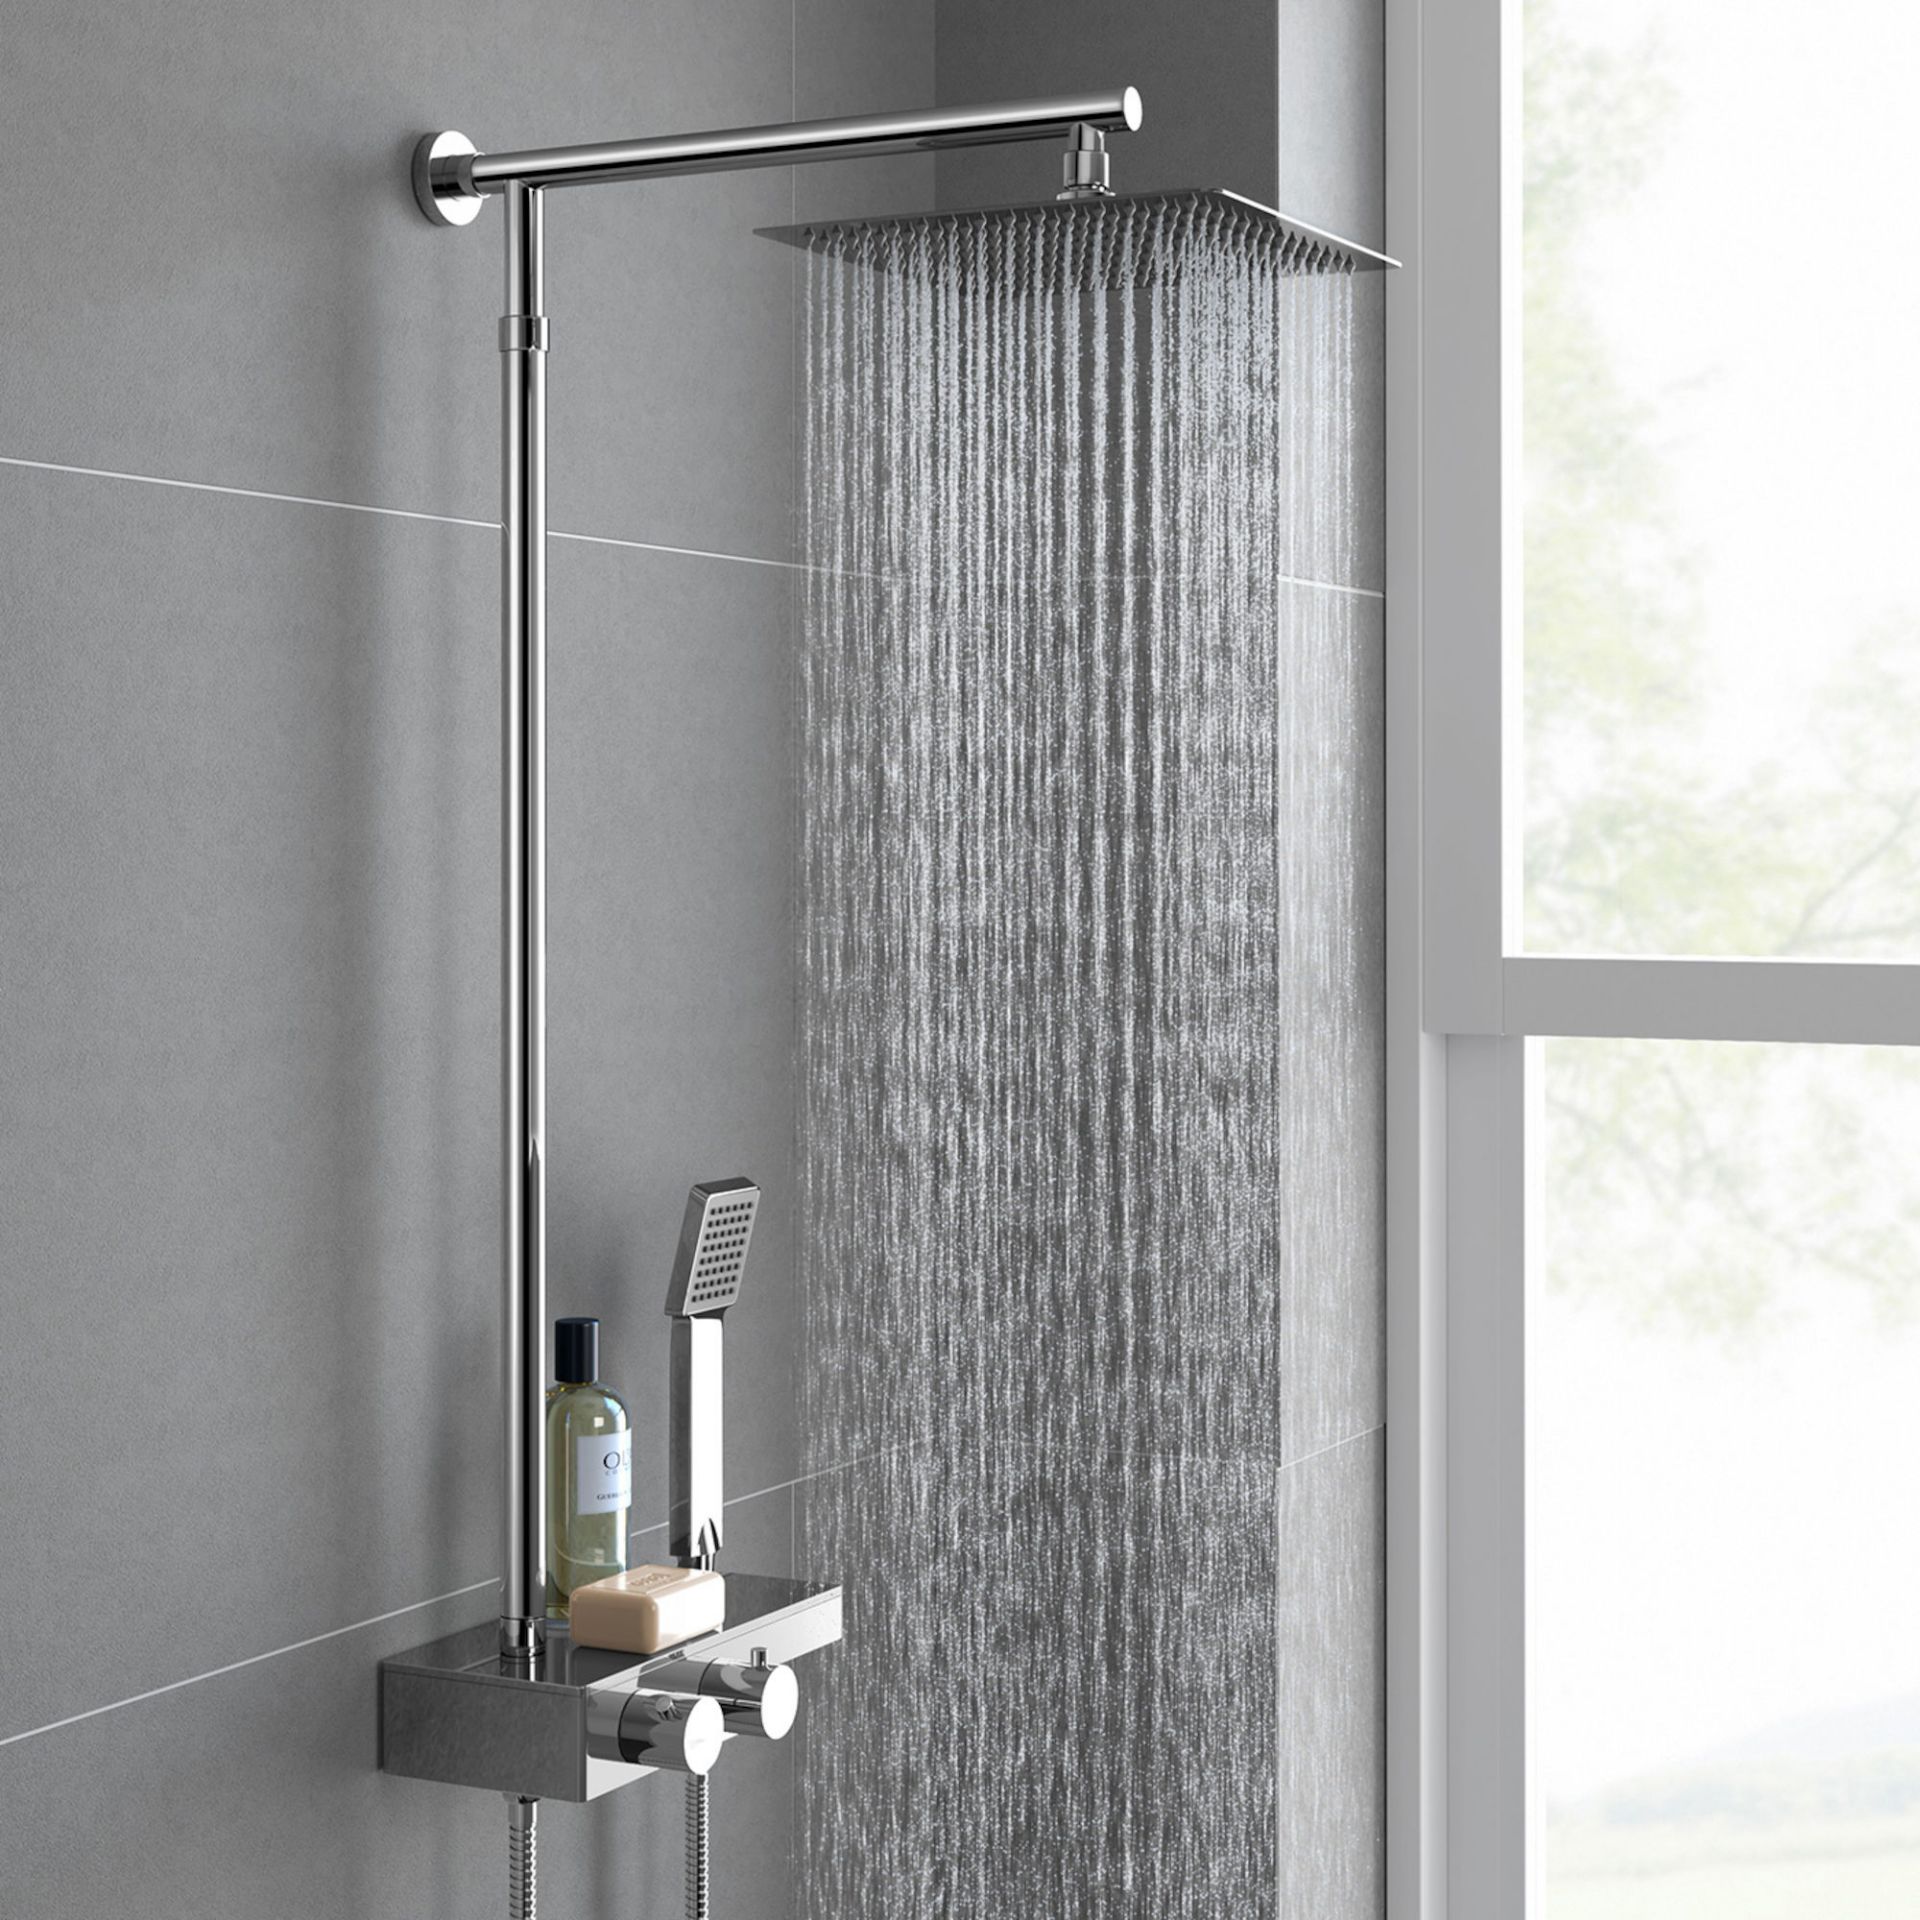 (RK99) Square Exposed Thermostatic Shower Shelf, Kit & Large Head. RRP £349.99. Style meets fu...